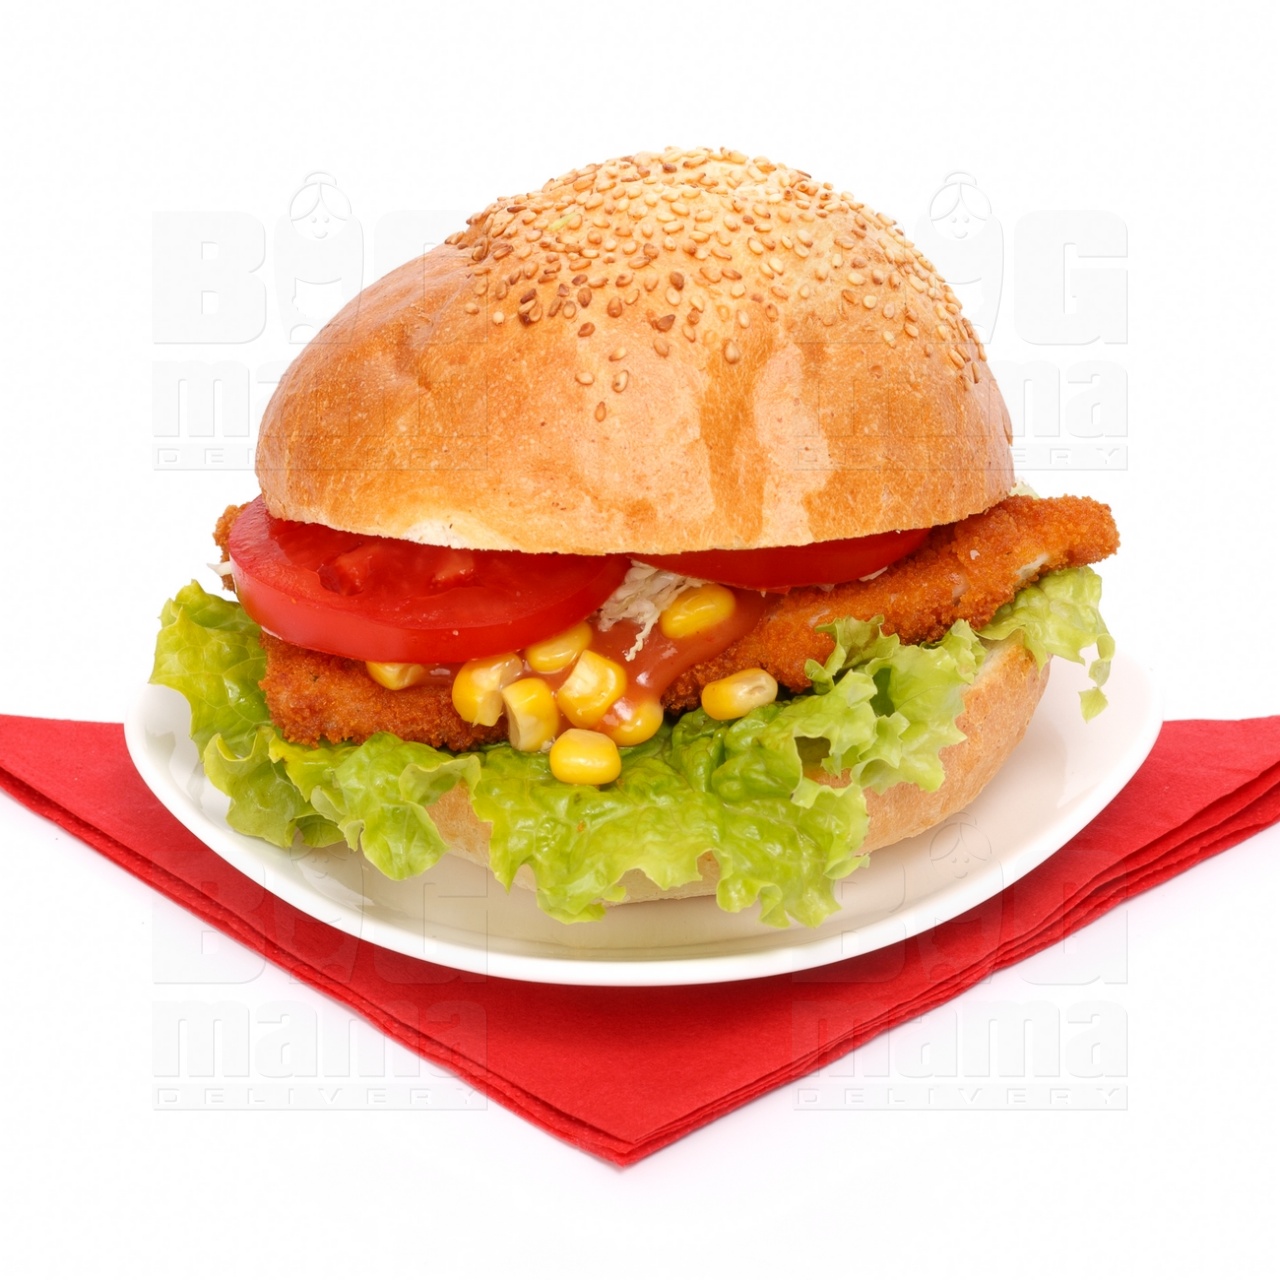 Product #54 image - Big Mexican sandwich with chicken schnitzel